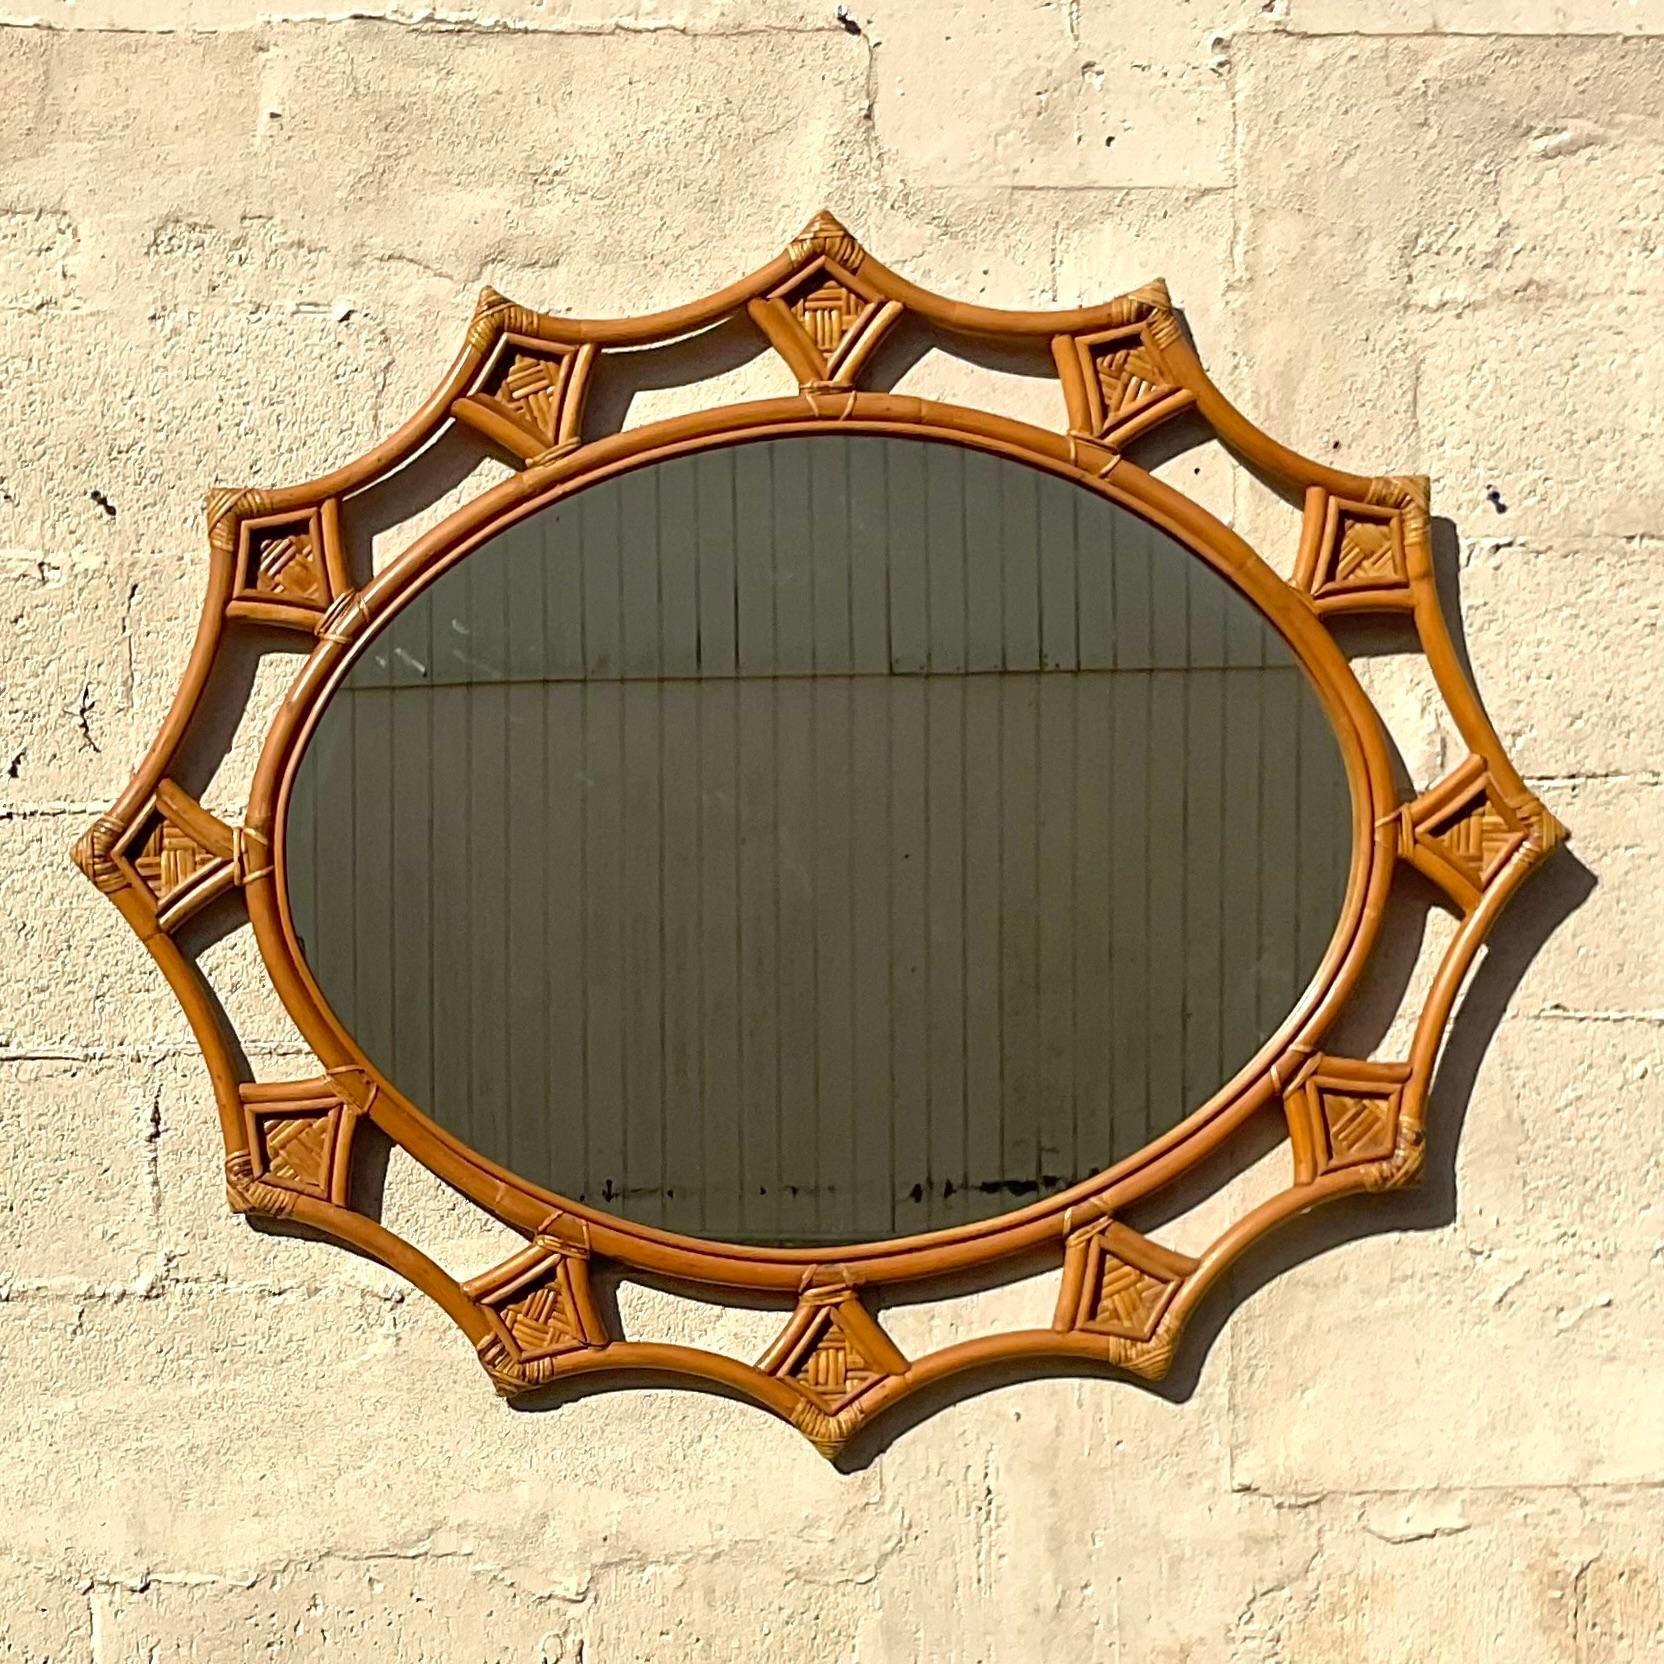 A fabulous vintage Coastal wall mirror. A chic scalloped rattan with inset wrapped rattan joints. Acquired from a Palm Beach estate.